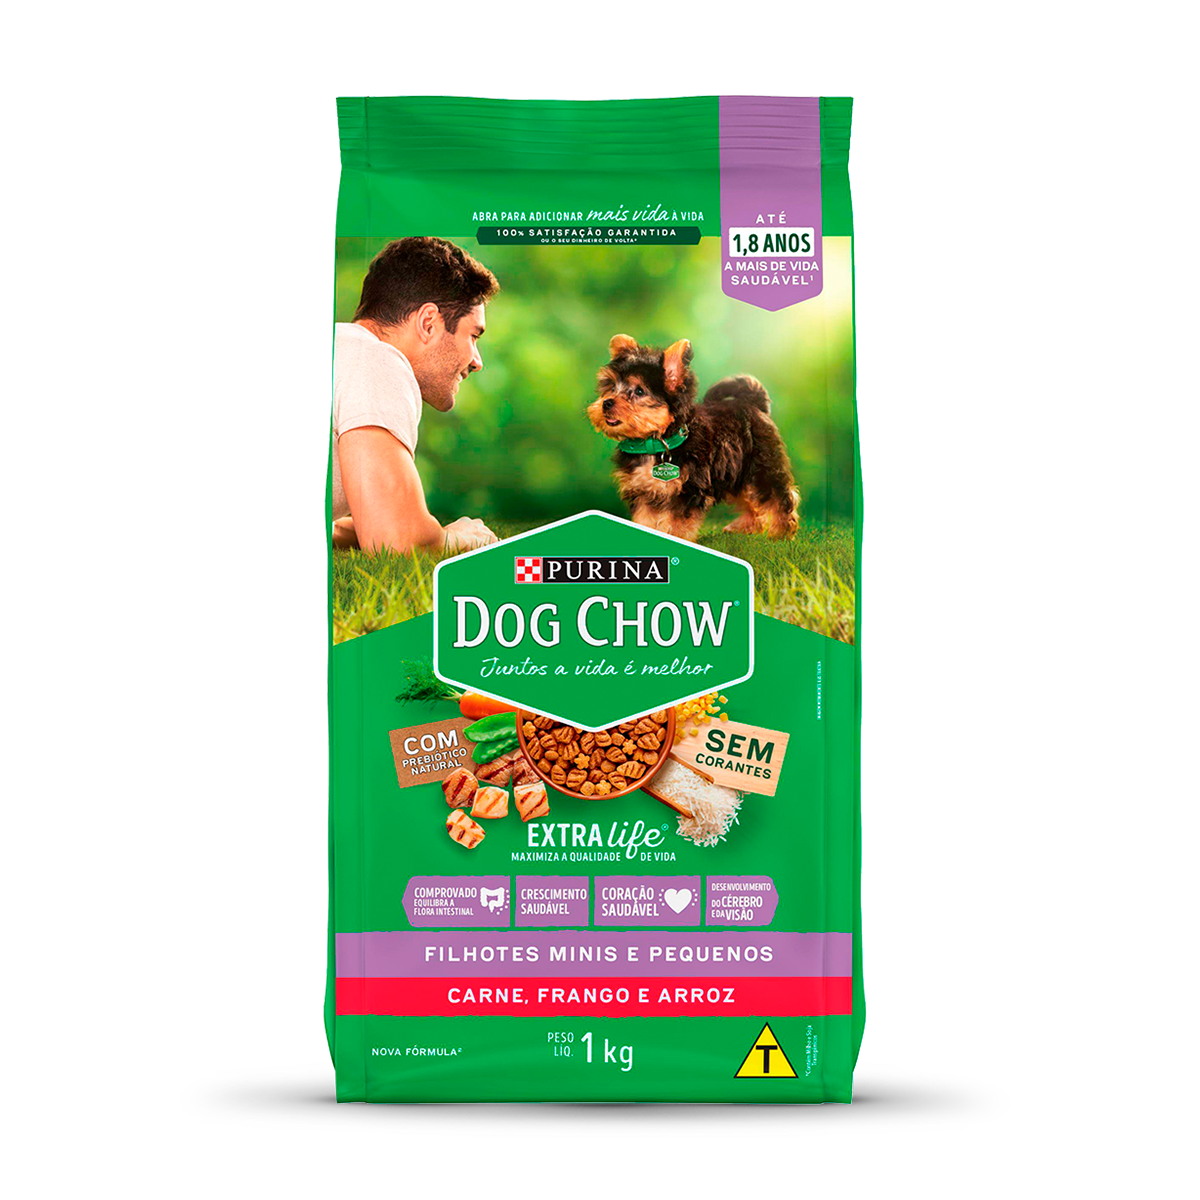 purina-dog-chow-filthoes-minis.png